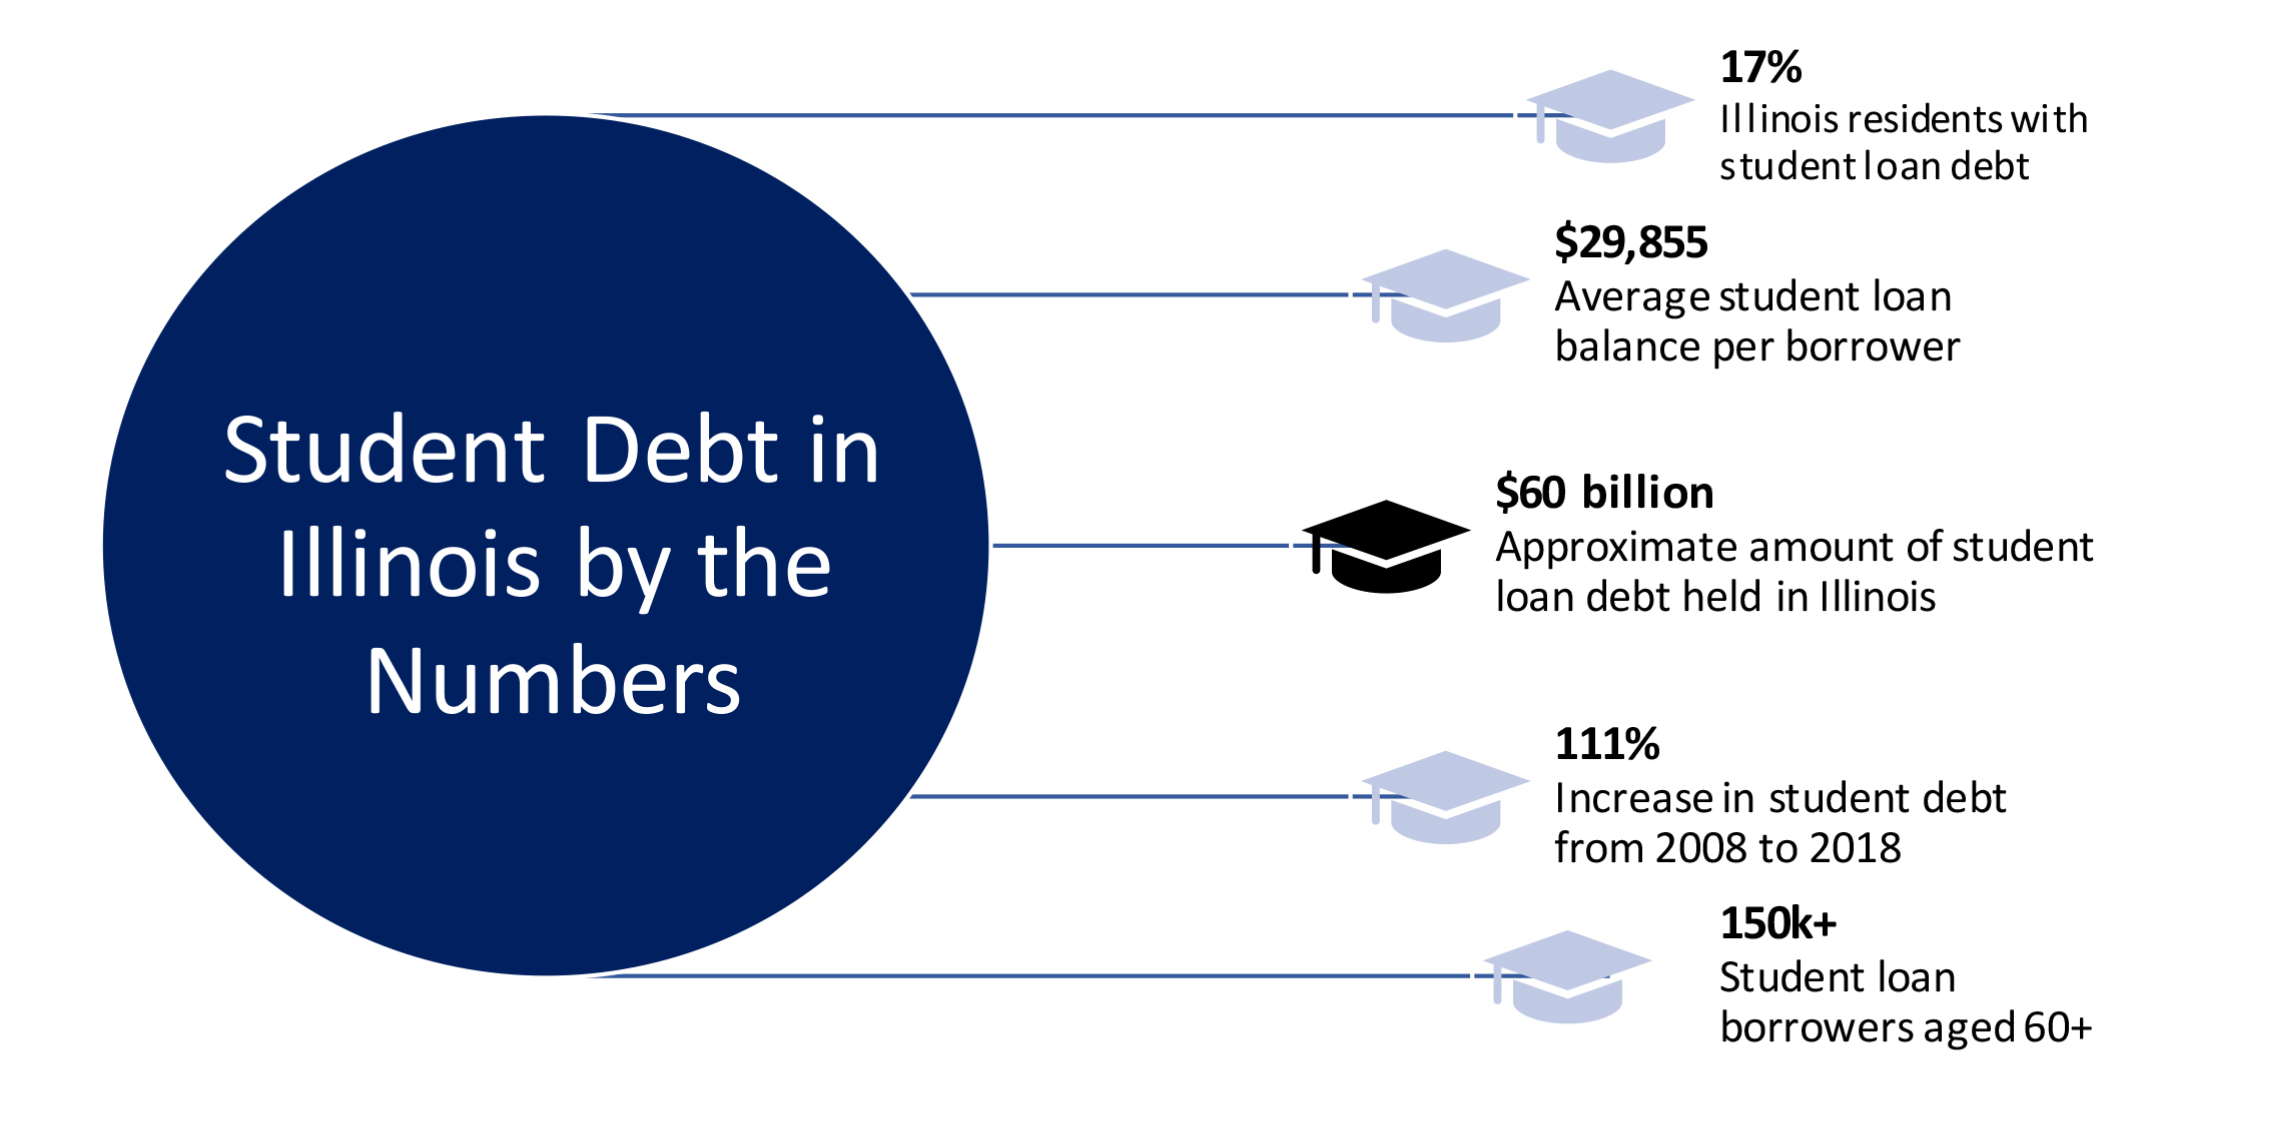 Student Debt in Illinois by the Numbers